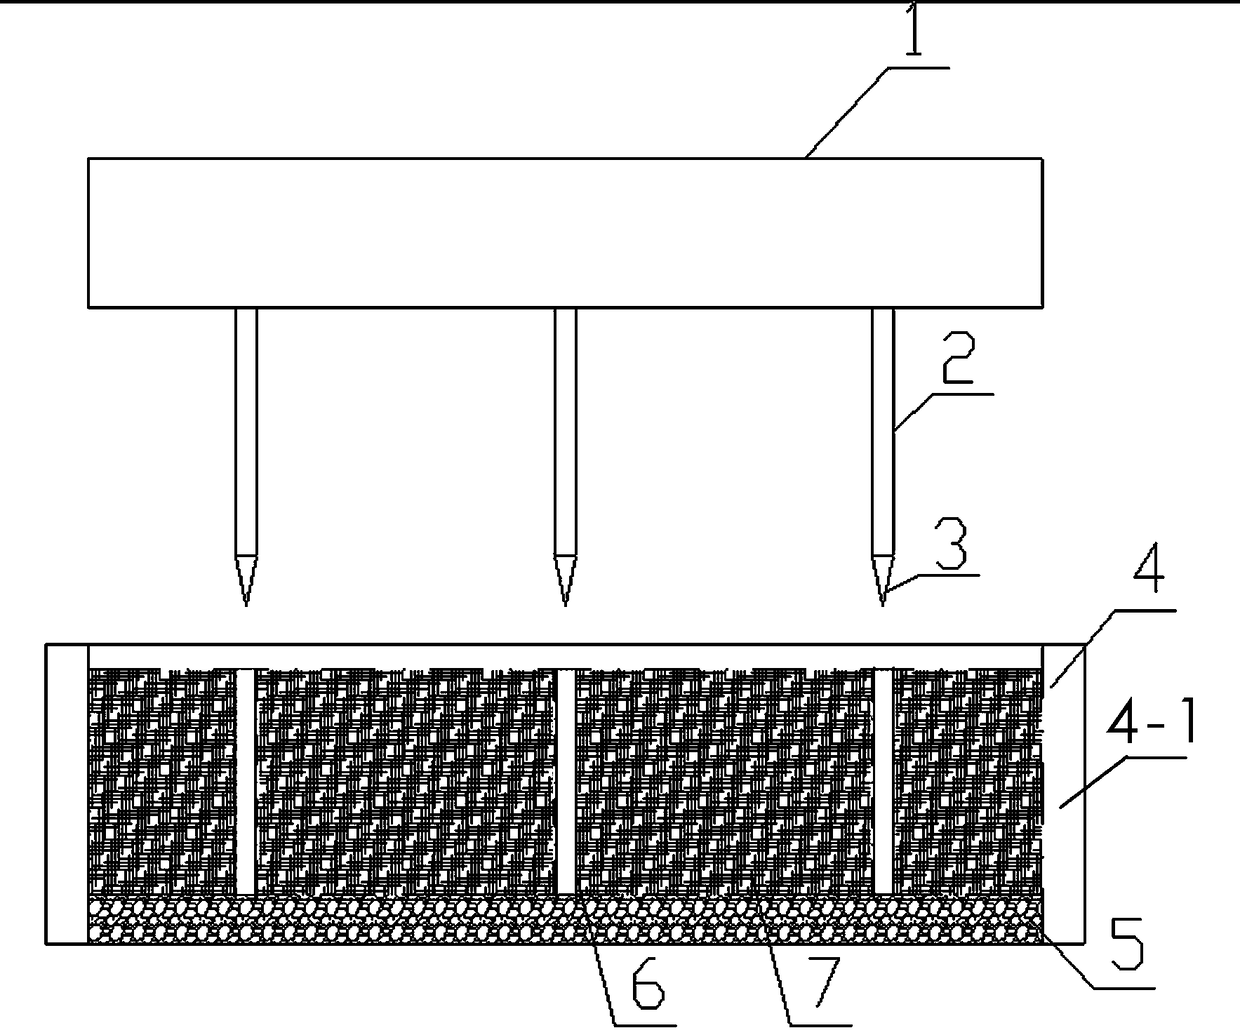 Guide hole water-permeable brick as well as brick machine mold and method for preparing same